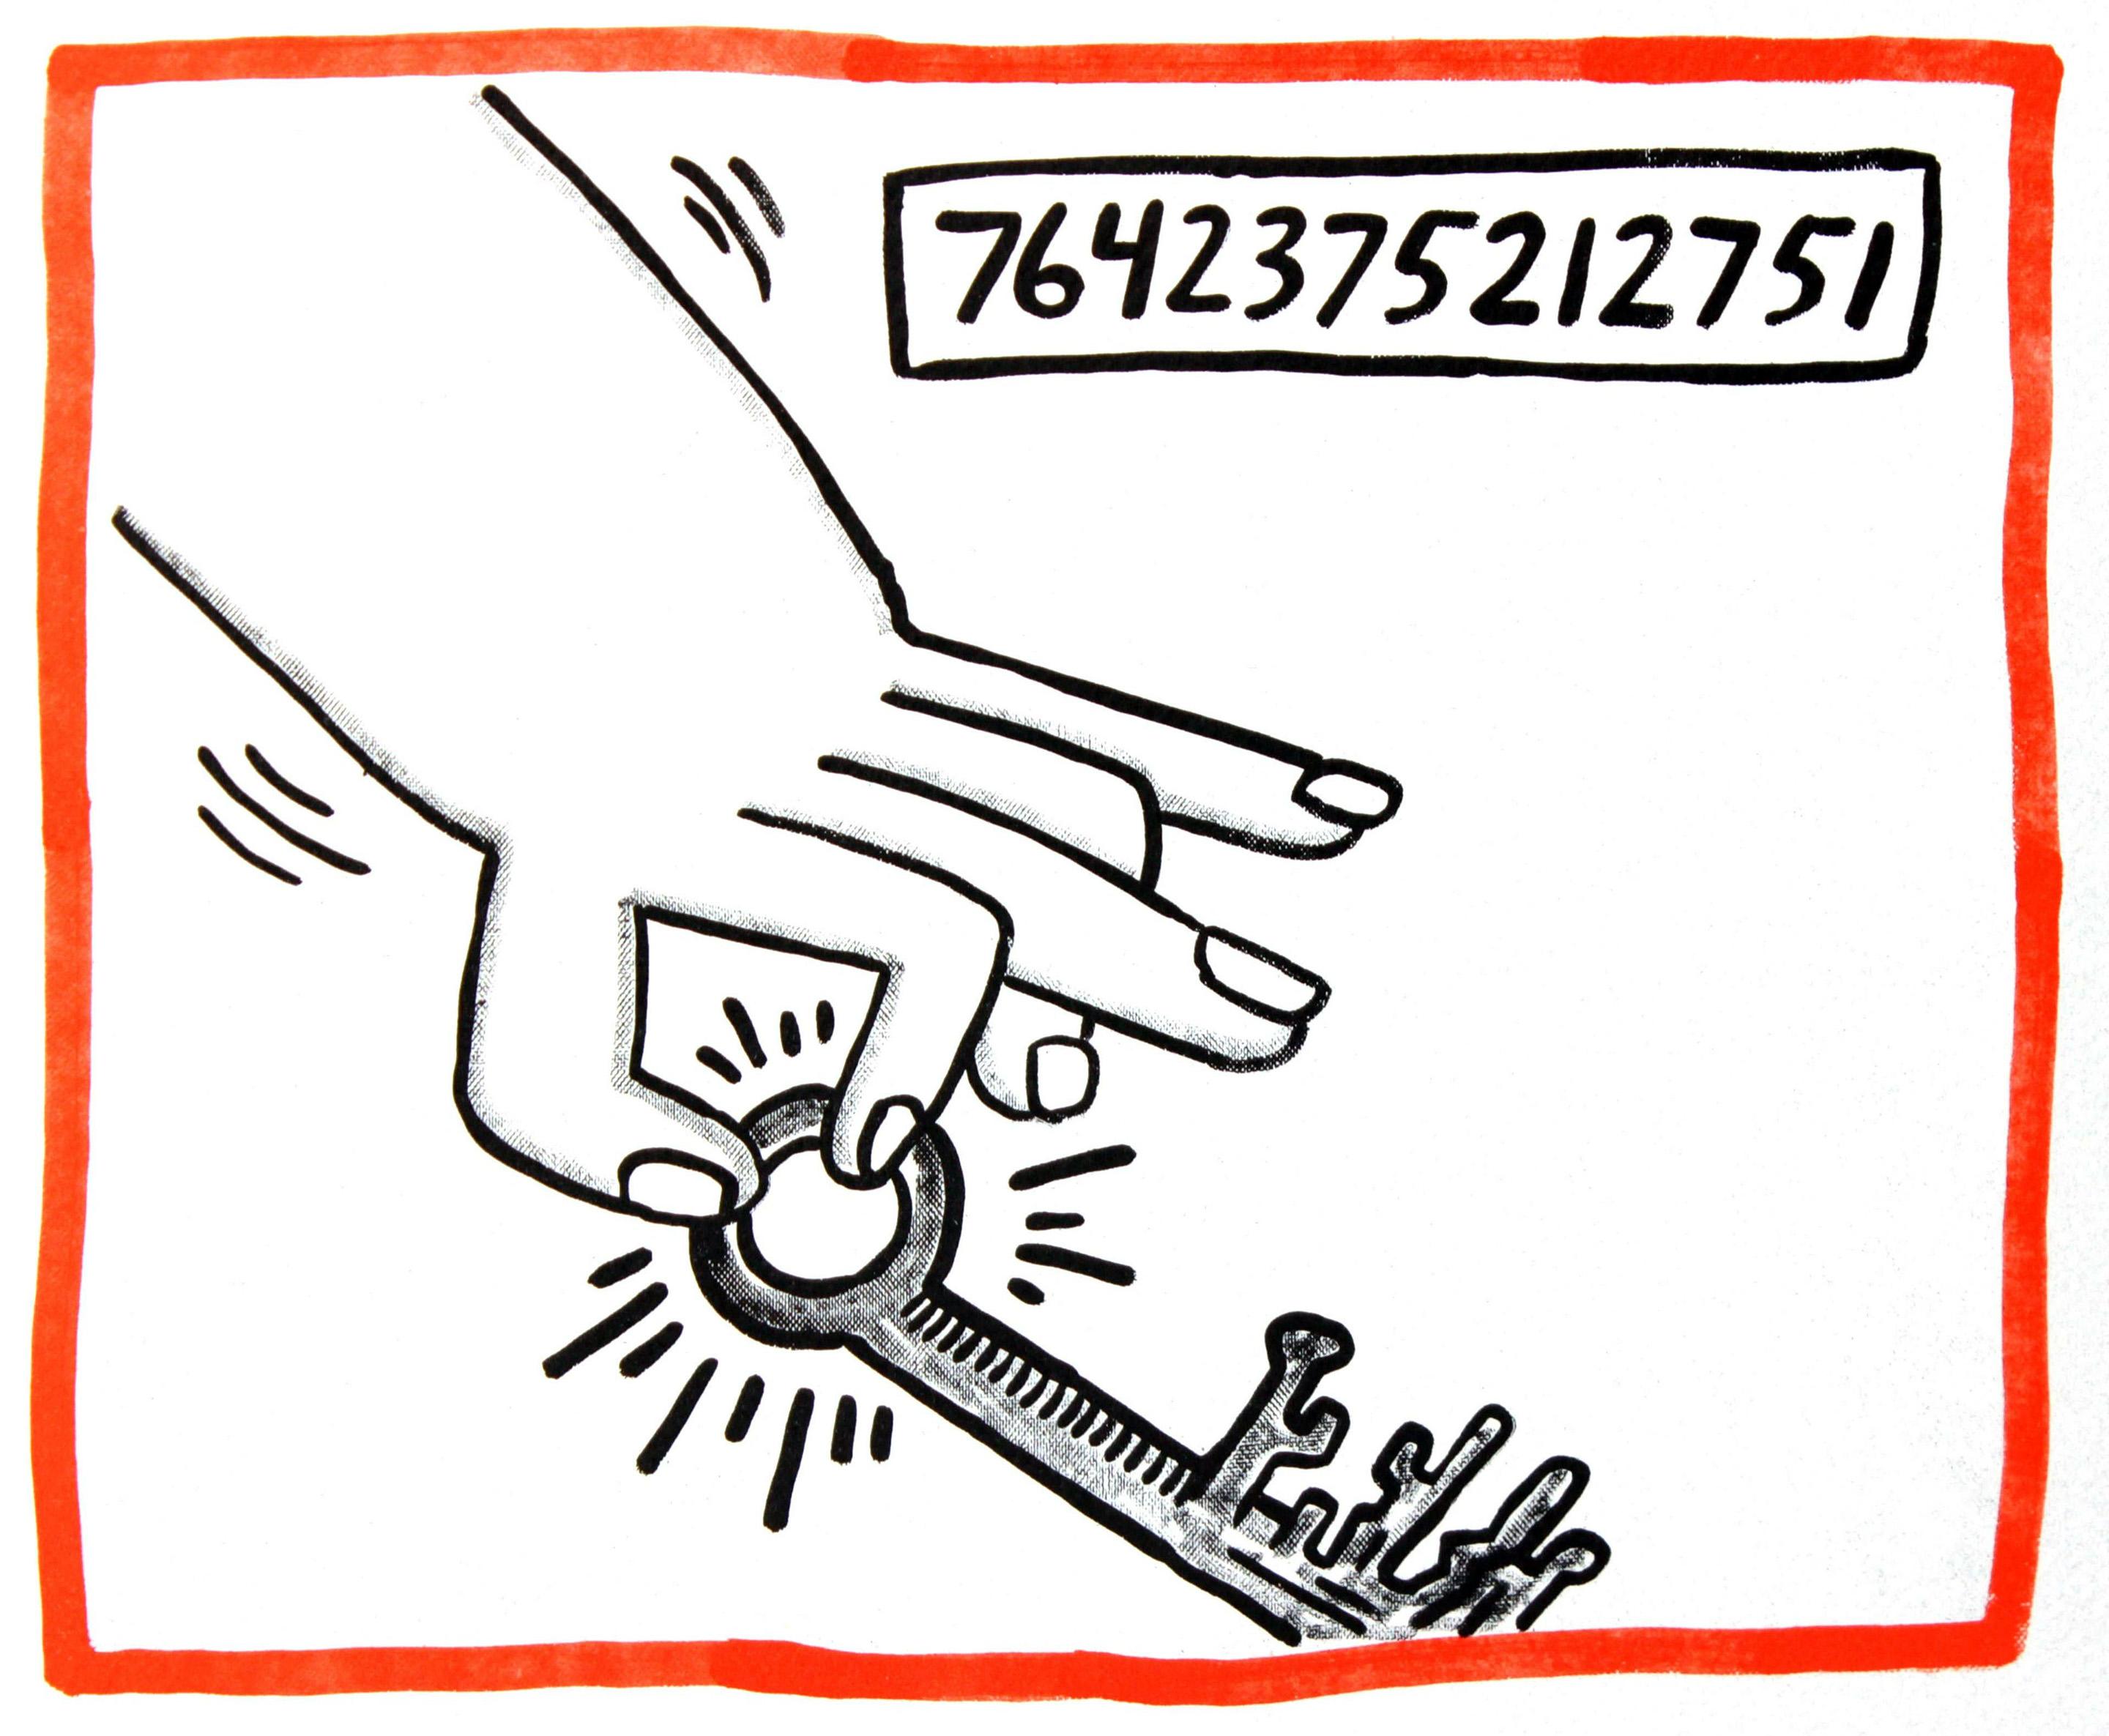 Keith Haring Against All Odds 1990 - Print by (after) Keith Haring